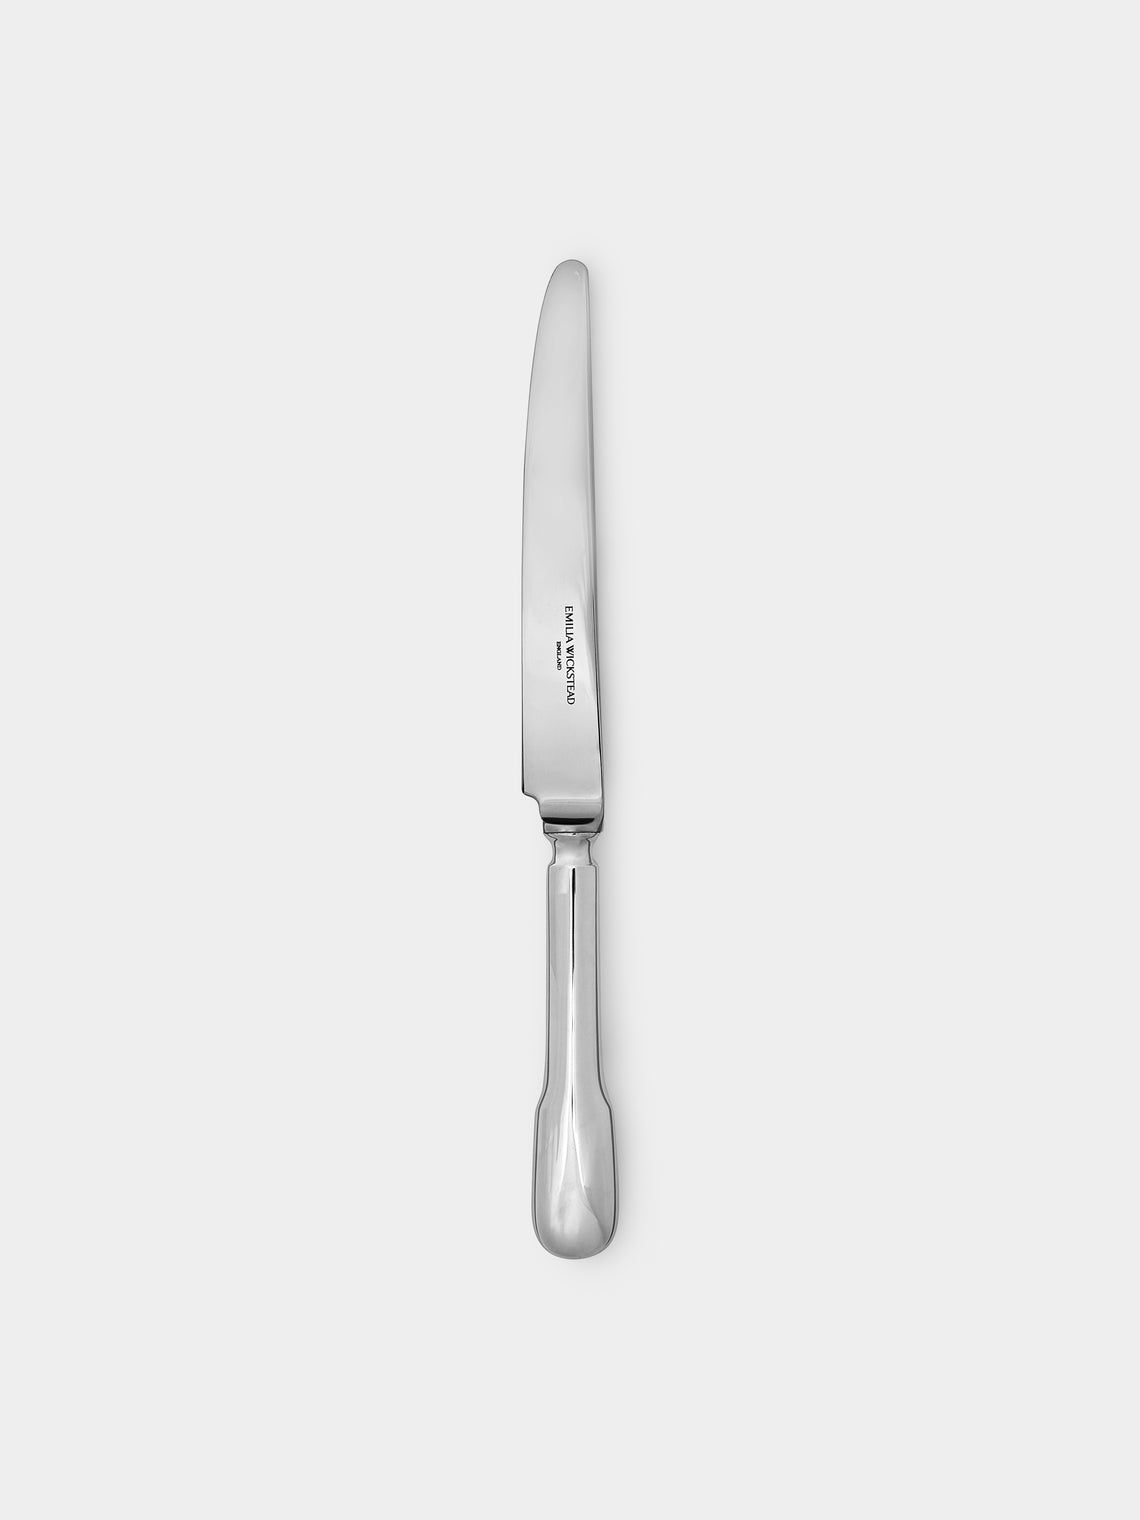 Emilia Wickstead - Florence Silver-Plated Table Knife -  - ABASK - 